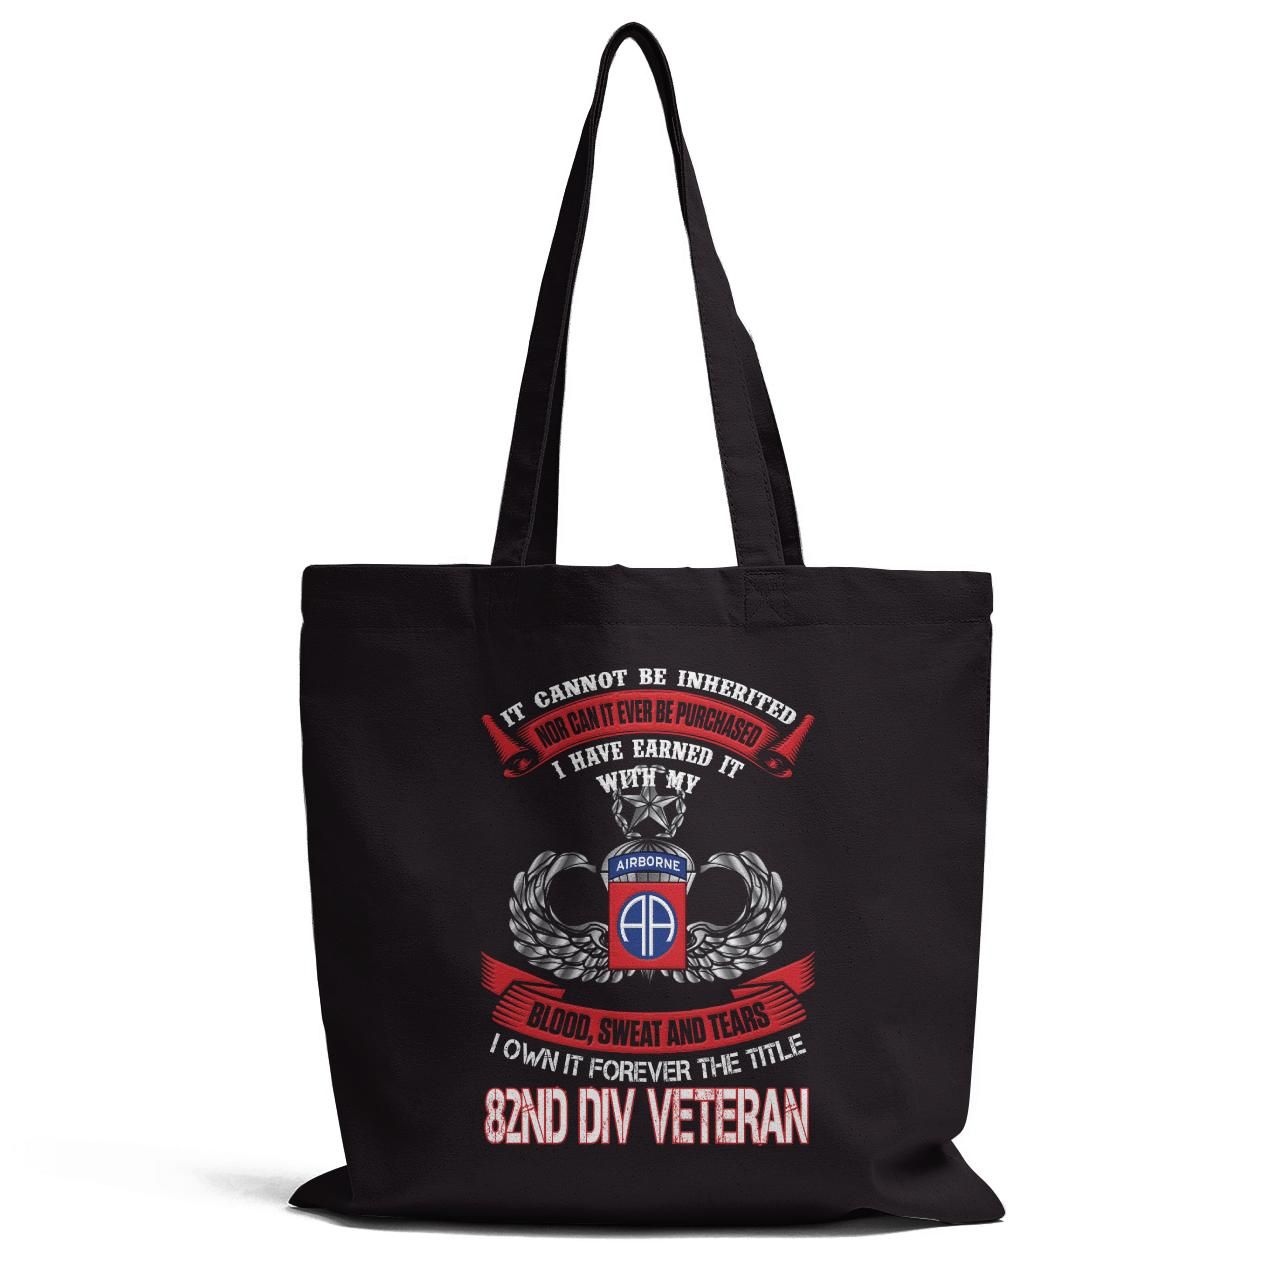 I Own It Forever The Title 82Nd Div Veteran Tote Bag